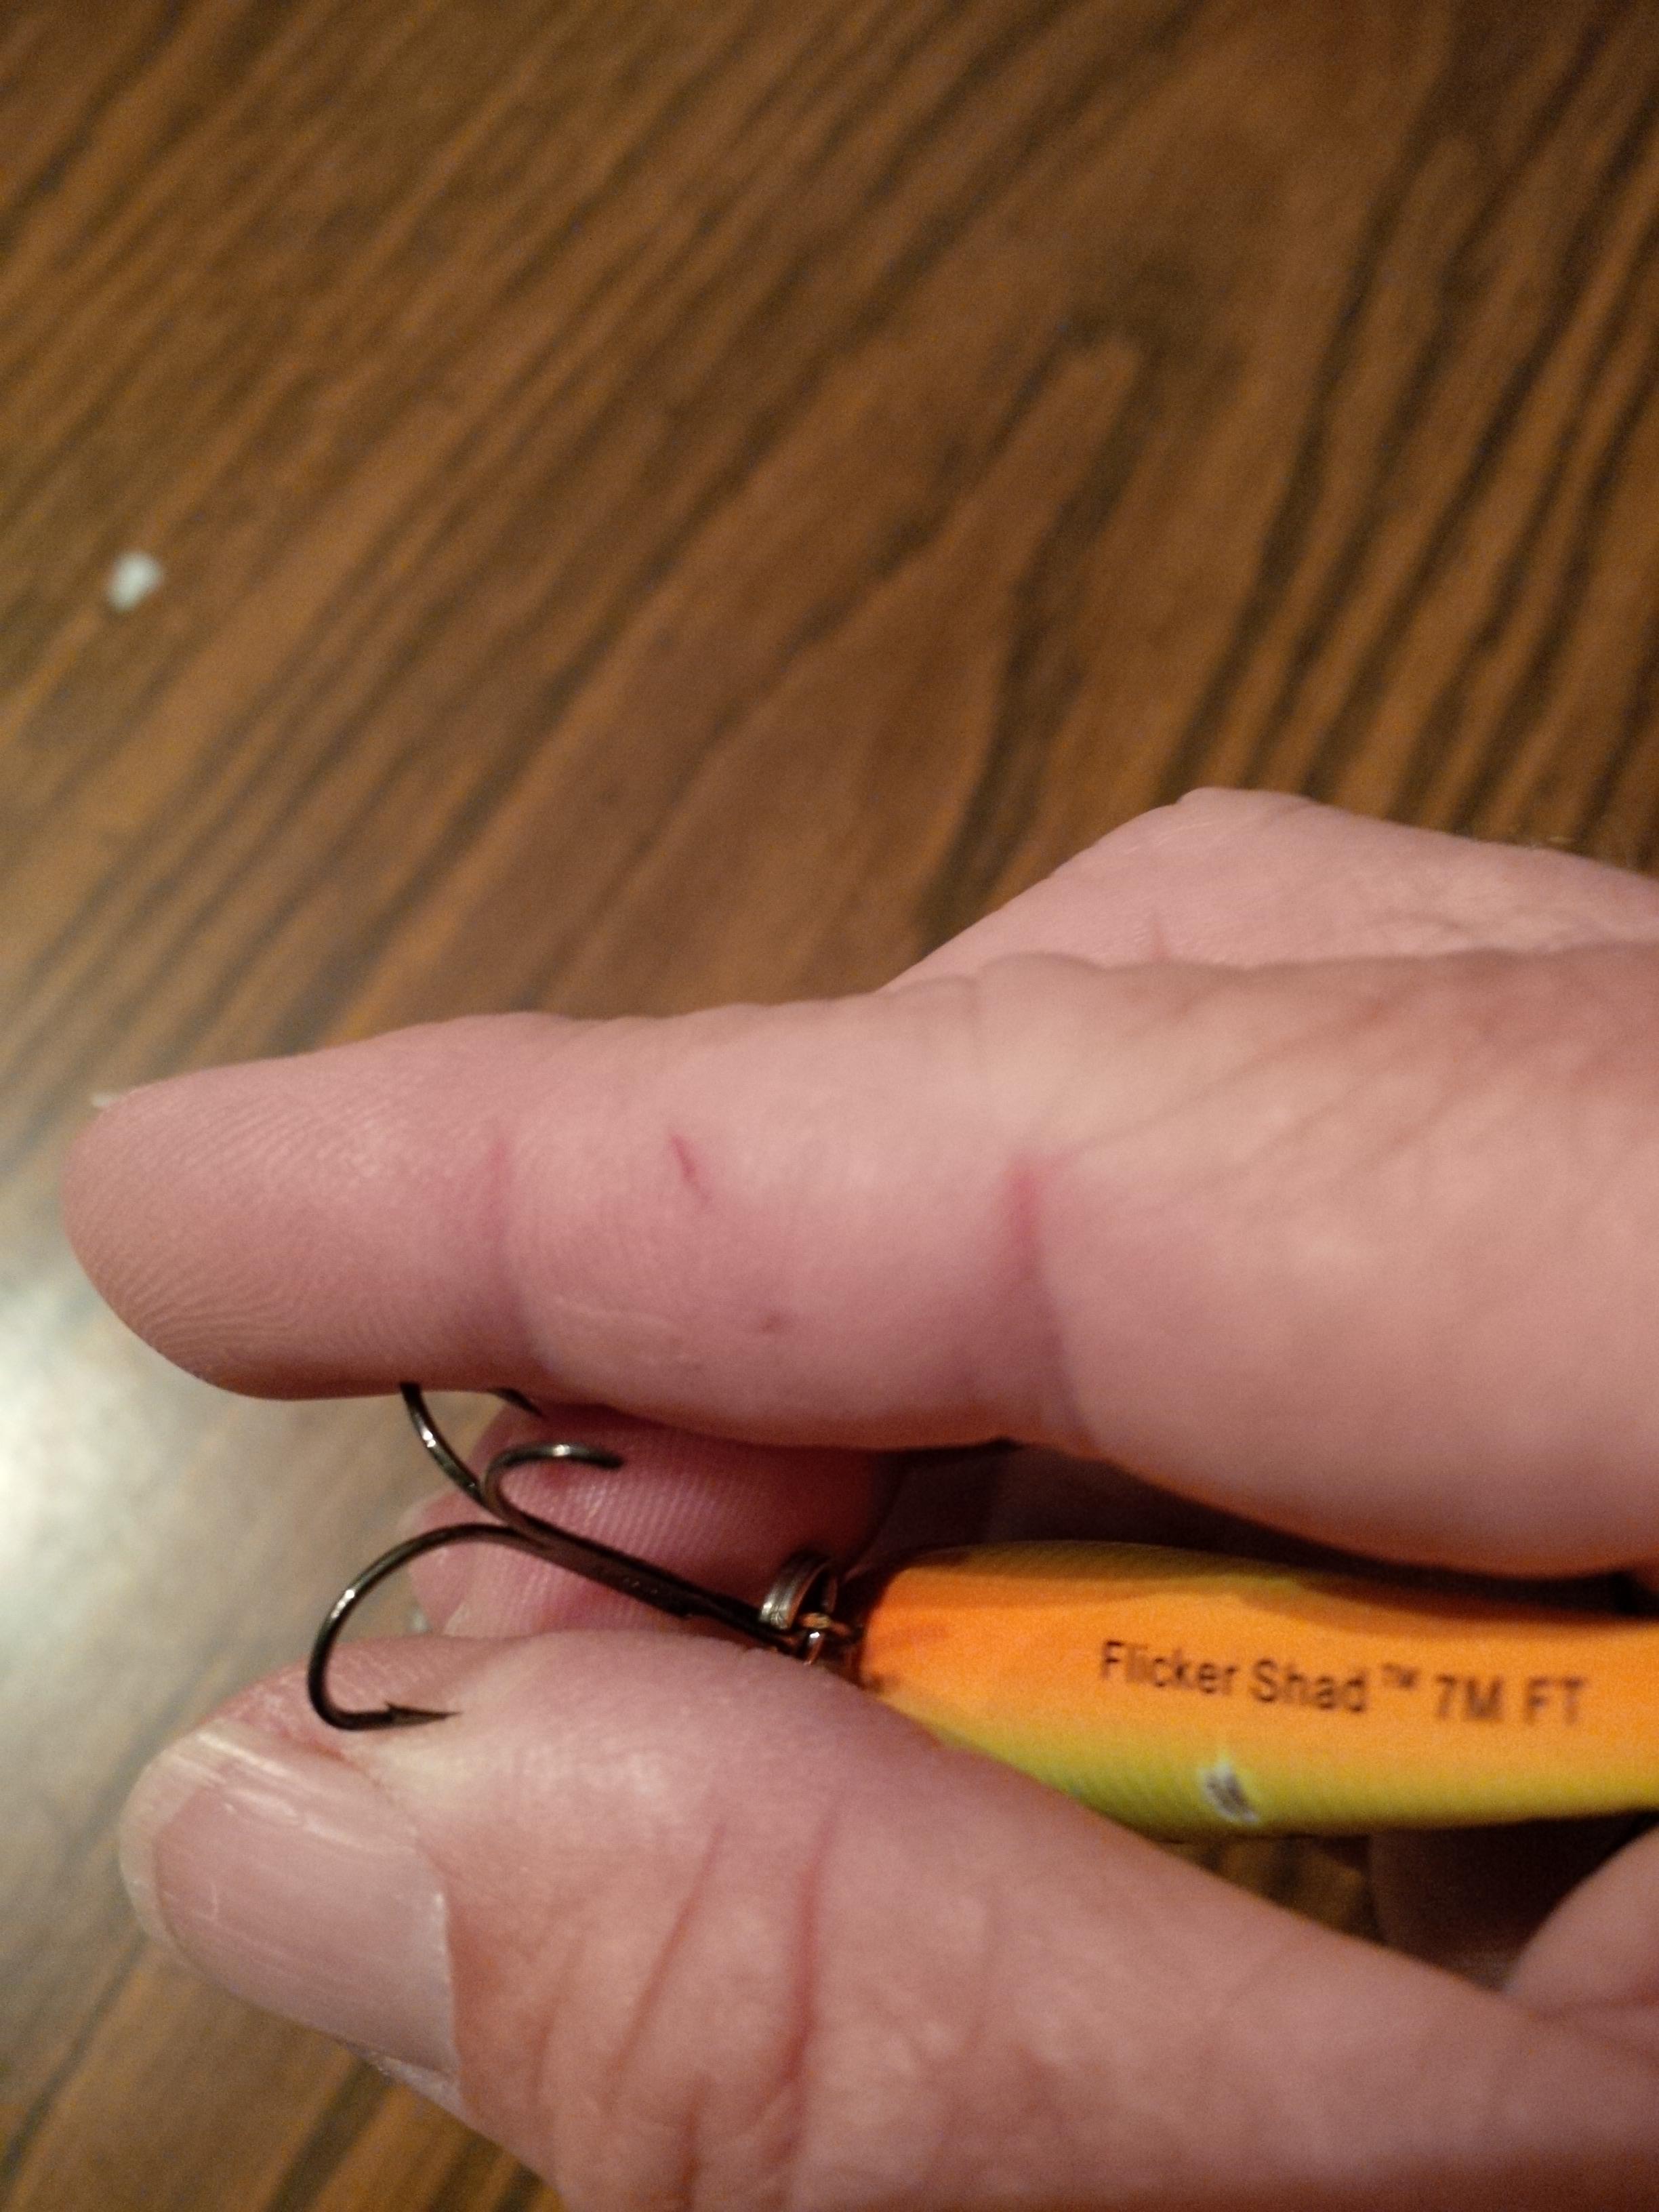 Smallest Fly Hook - General Angling Discussion - OzarkAnglers.Com Forum